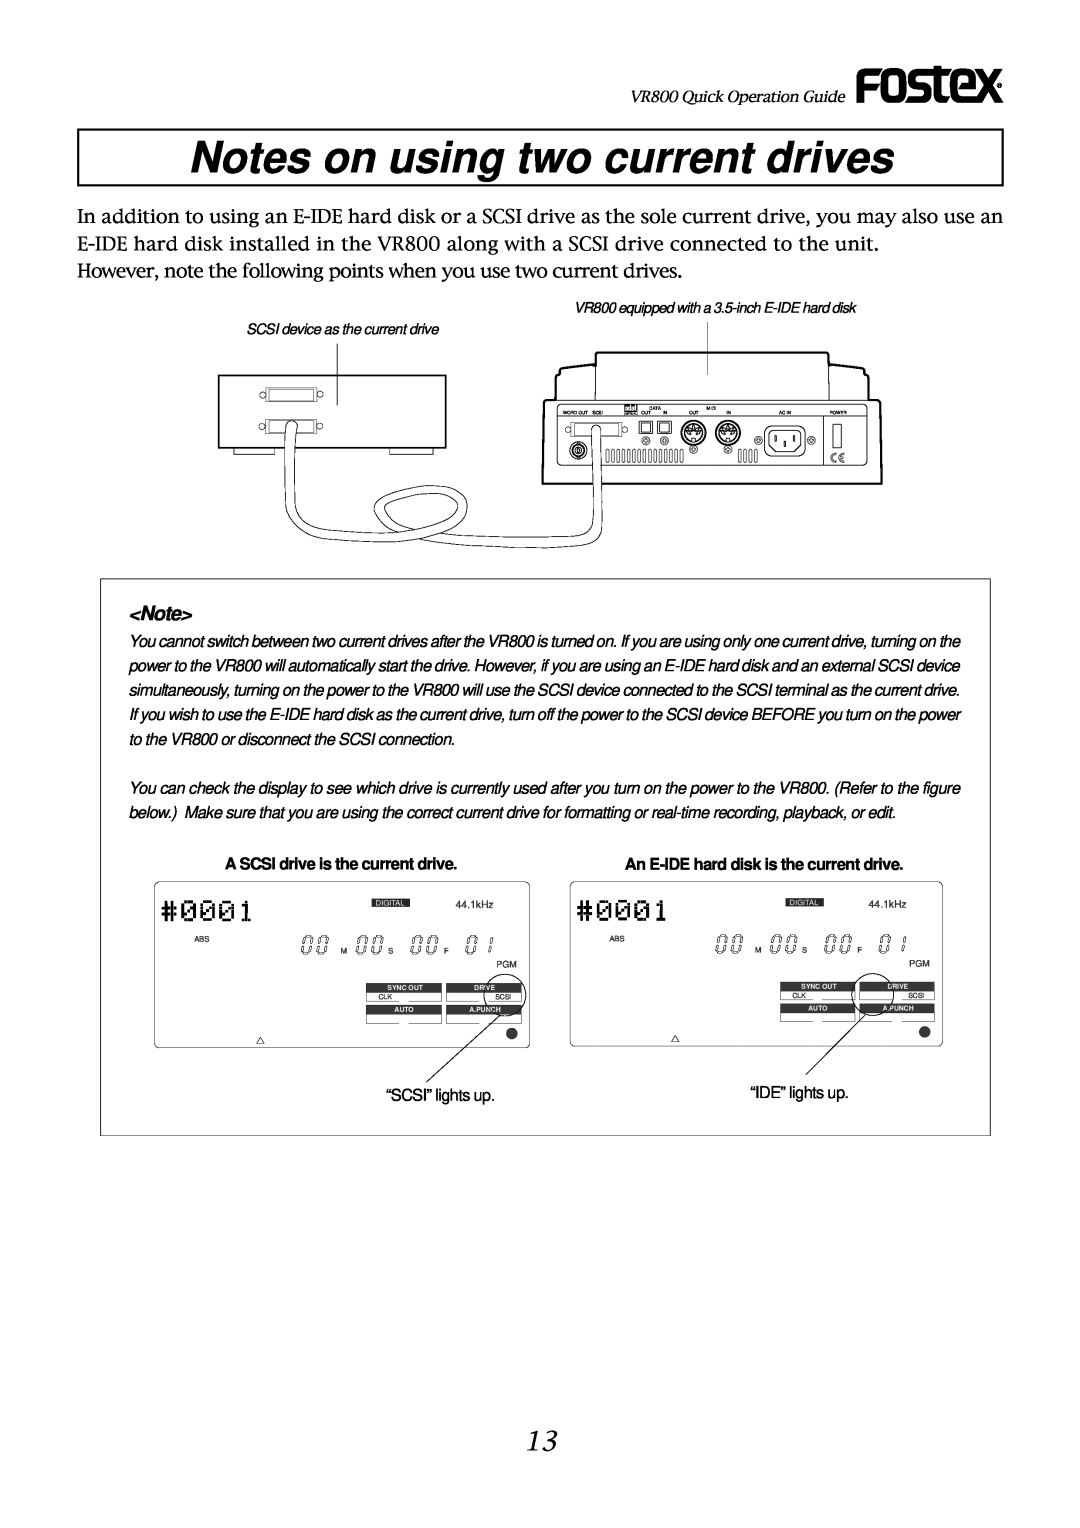 Fostex VR800 Notes on using two current drives, However, note the following points when you use two current drives 